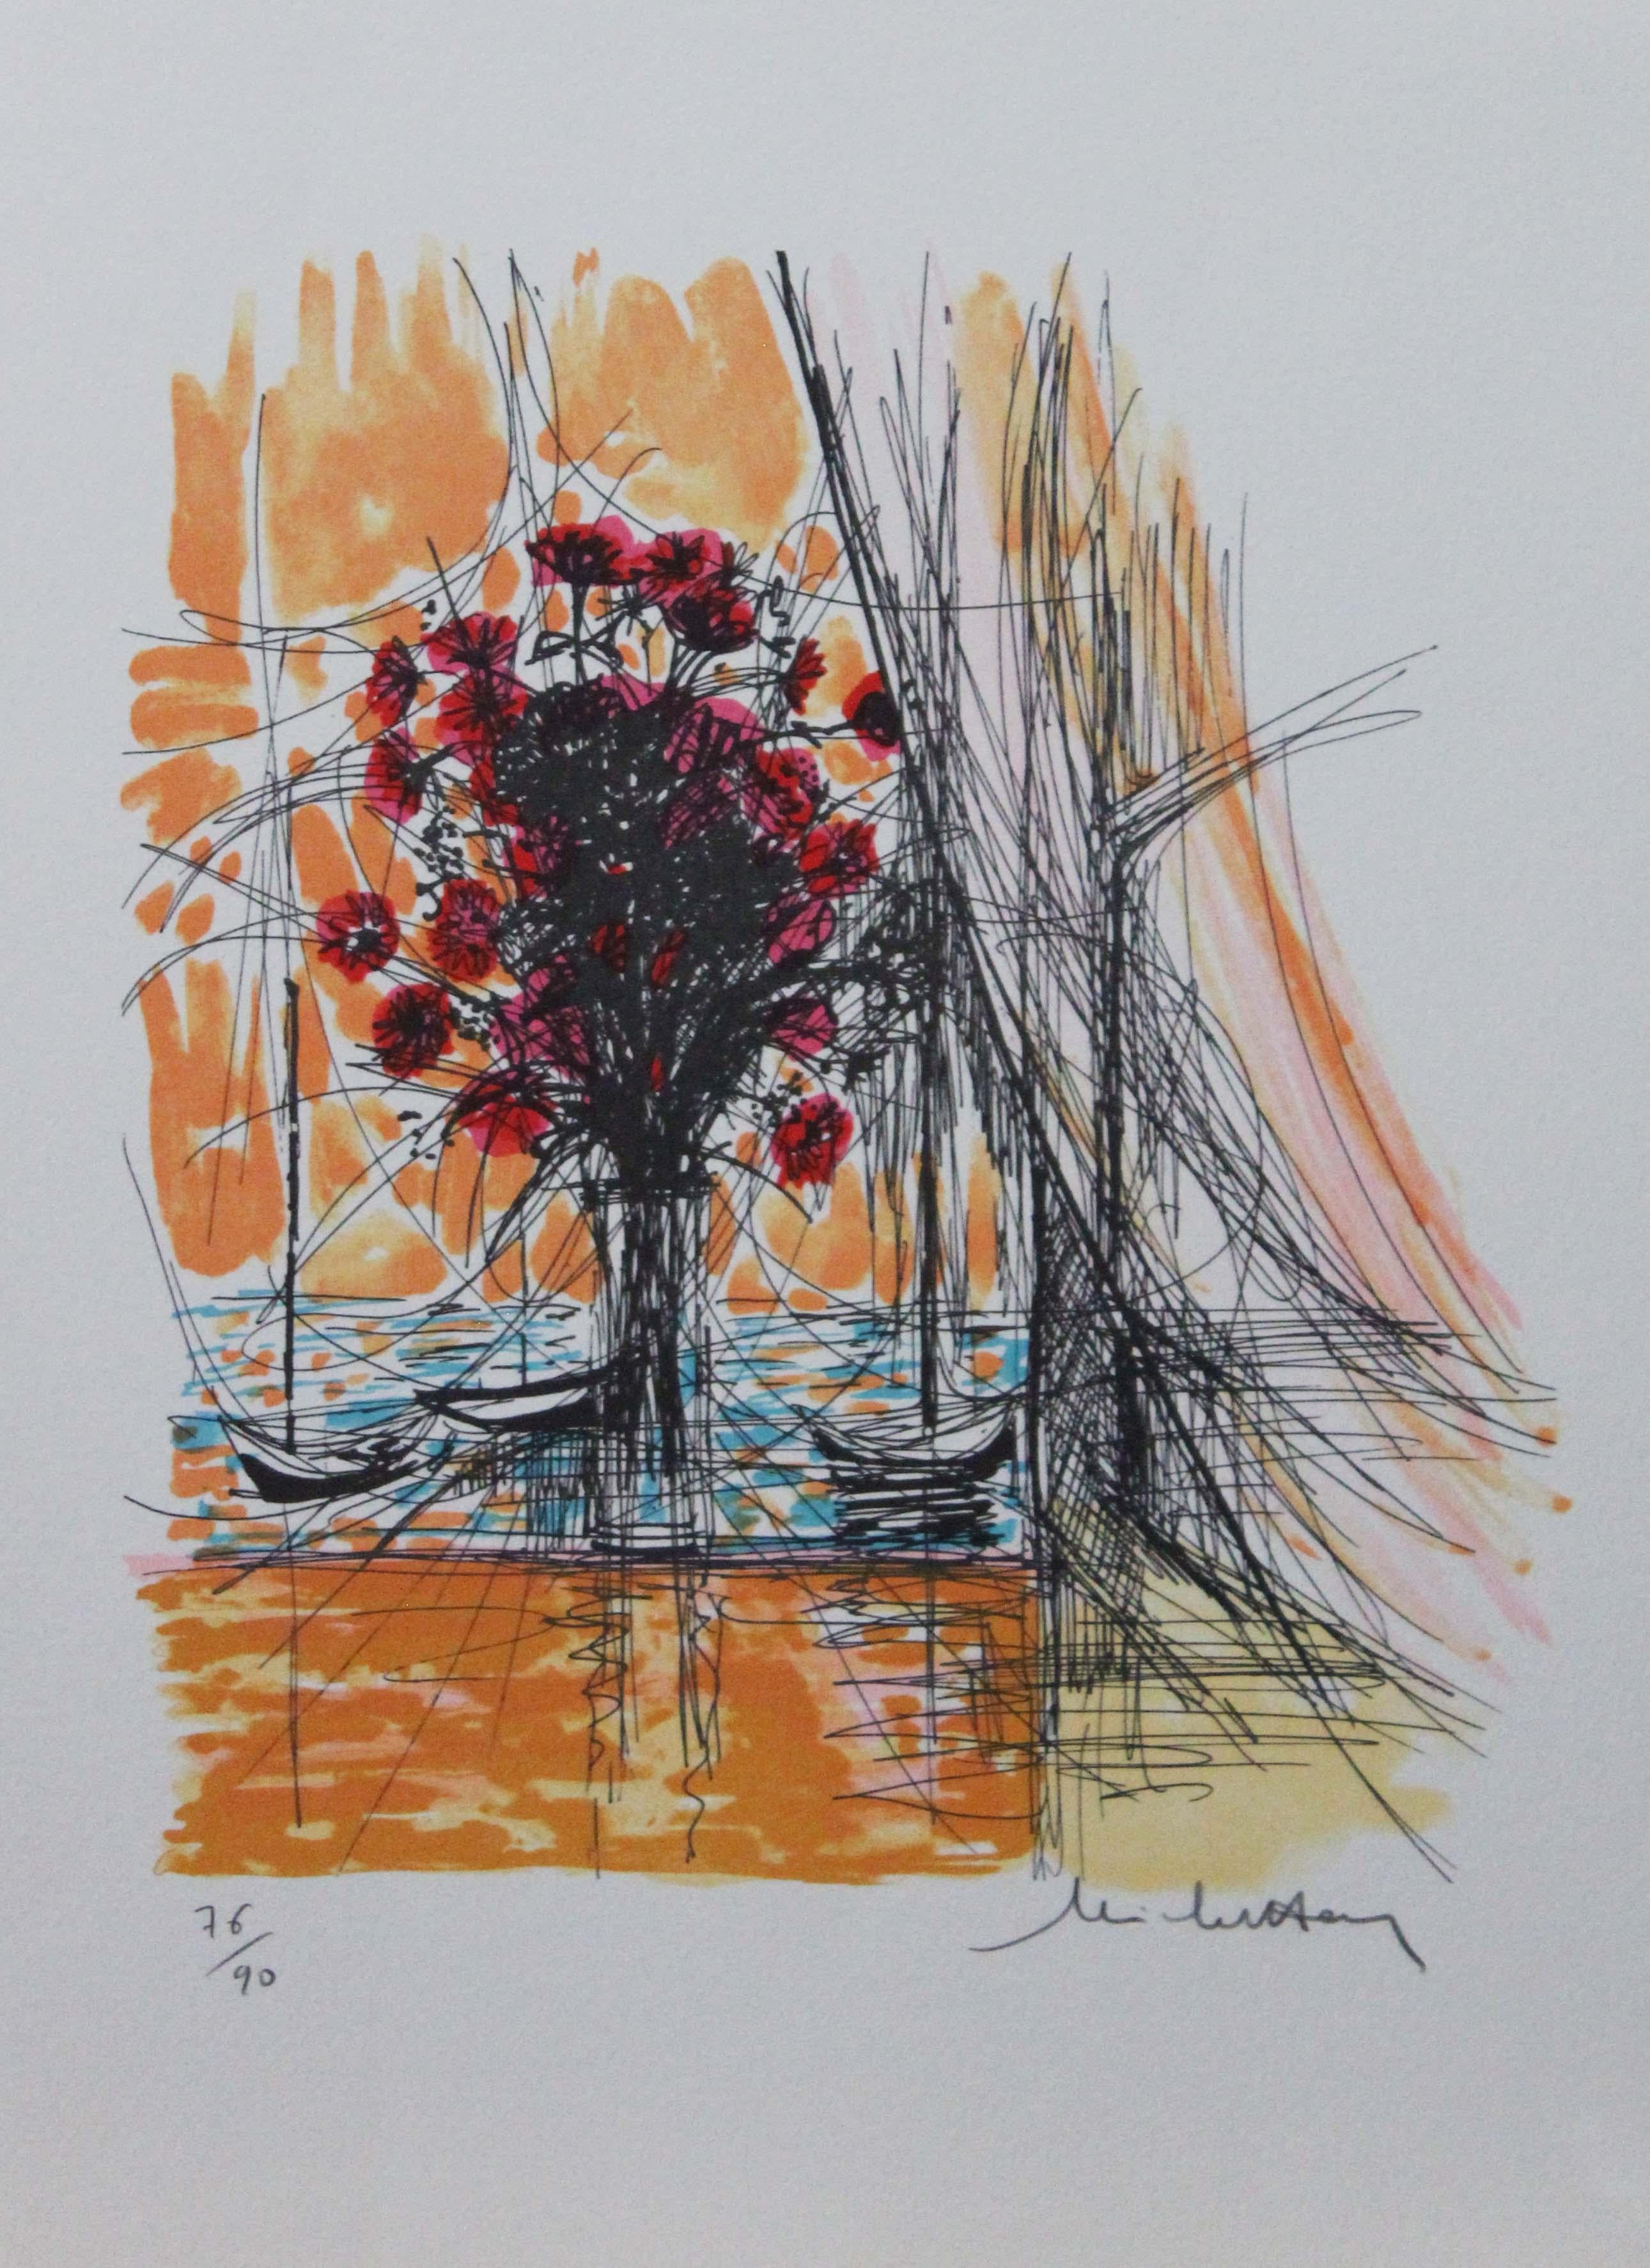 Unknown Still-Life Print - Fleurs et Barges III-L. E. Print, Signed by Artist (Signature is Illegible) 